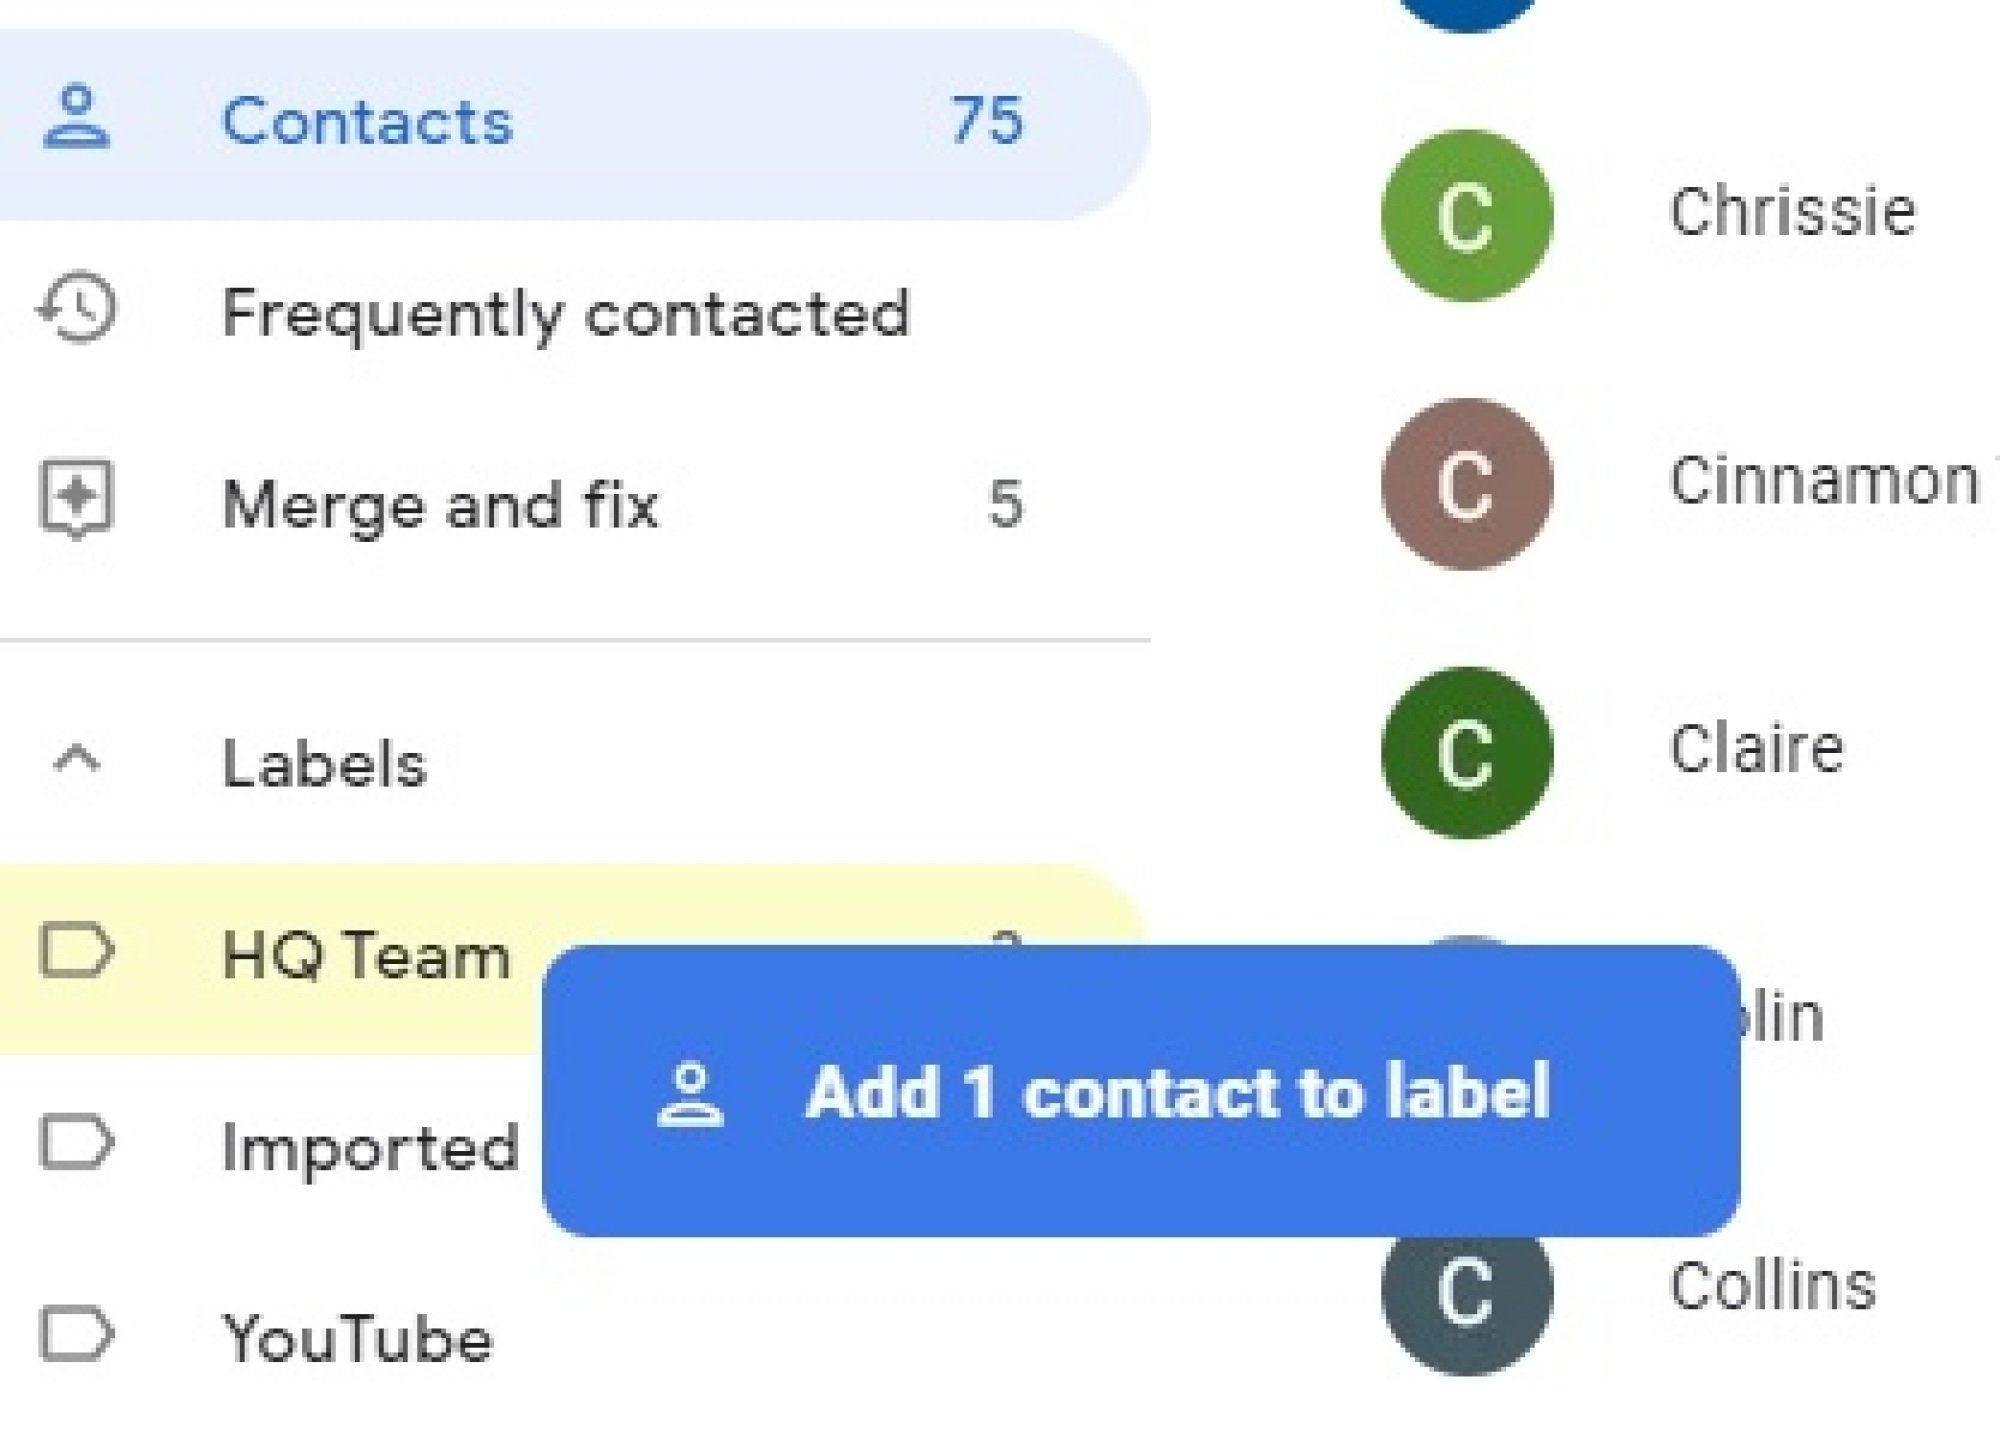 A Google Contacts screenshot as a user adds a contact to a label.